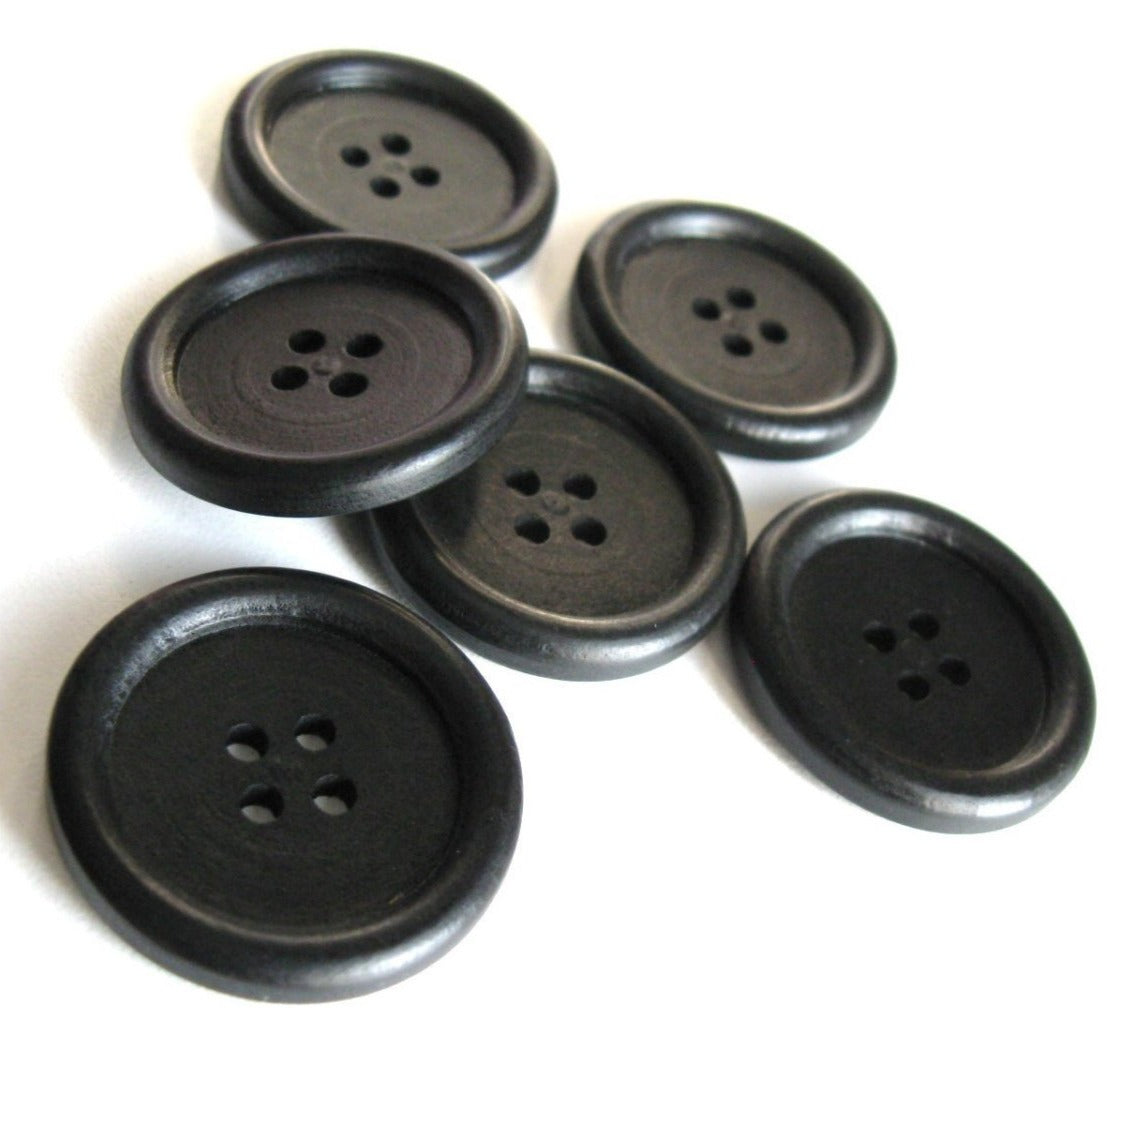 Black buttons 30mm - set of 6 wood buttons